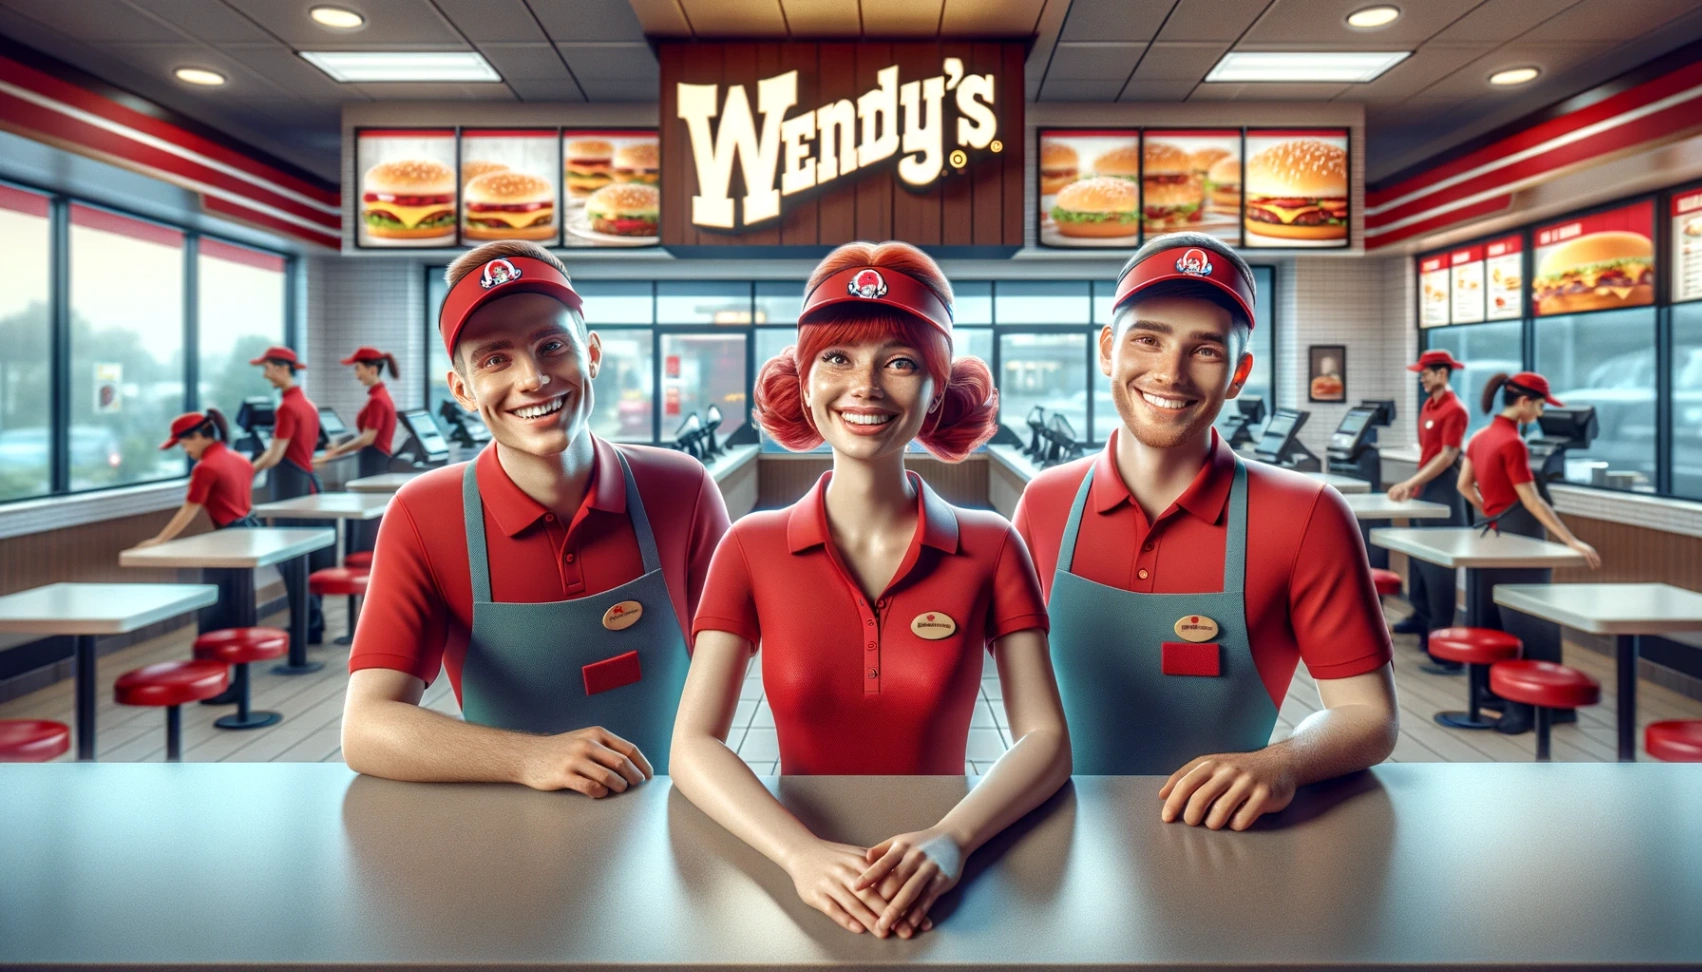 Job Openings at Wendy's – Learn How to Apply